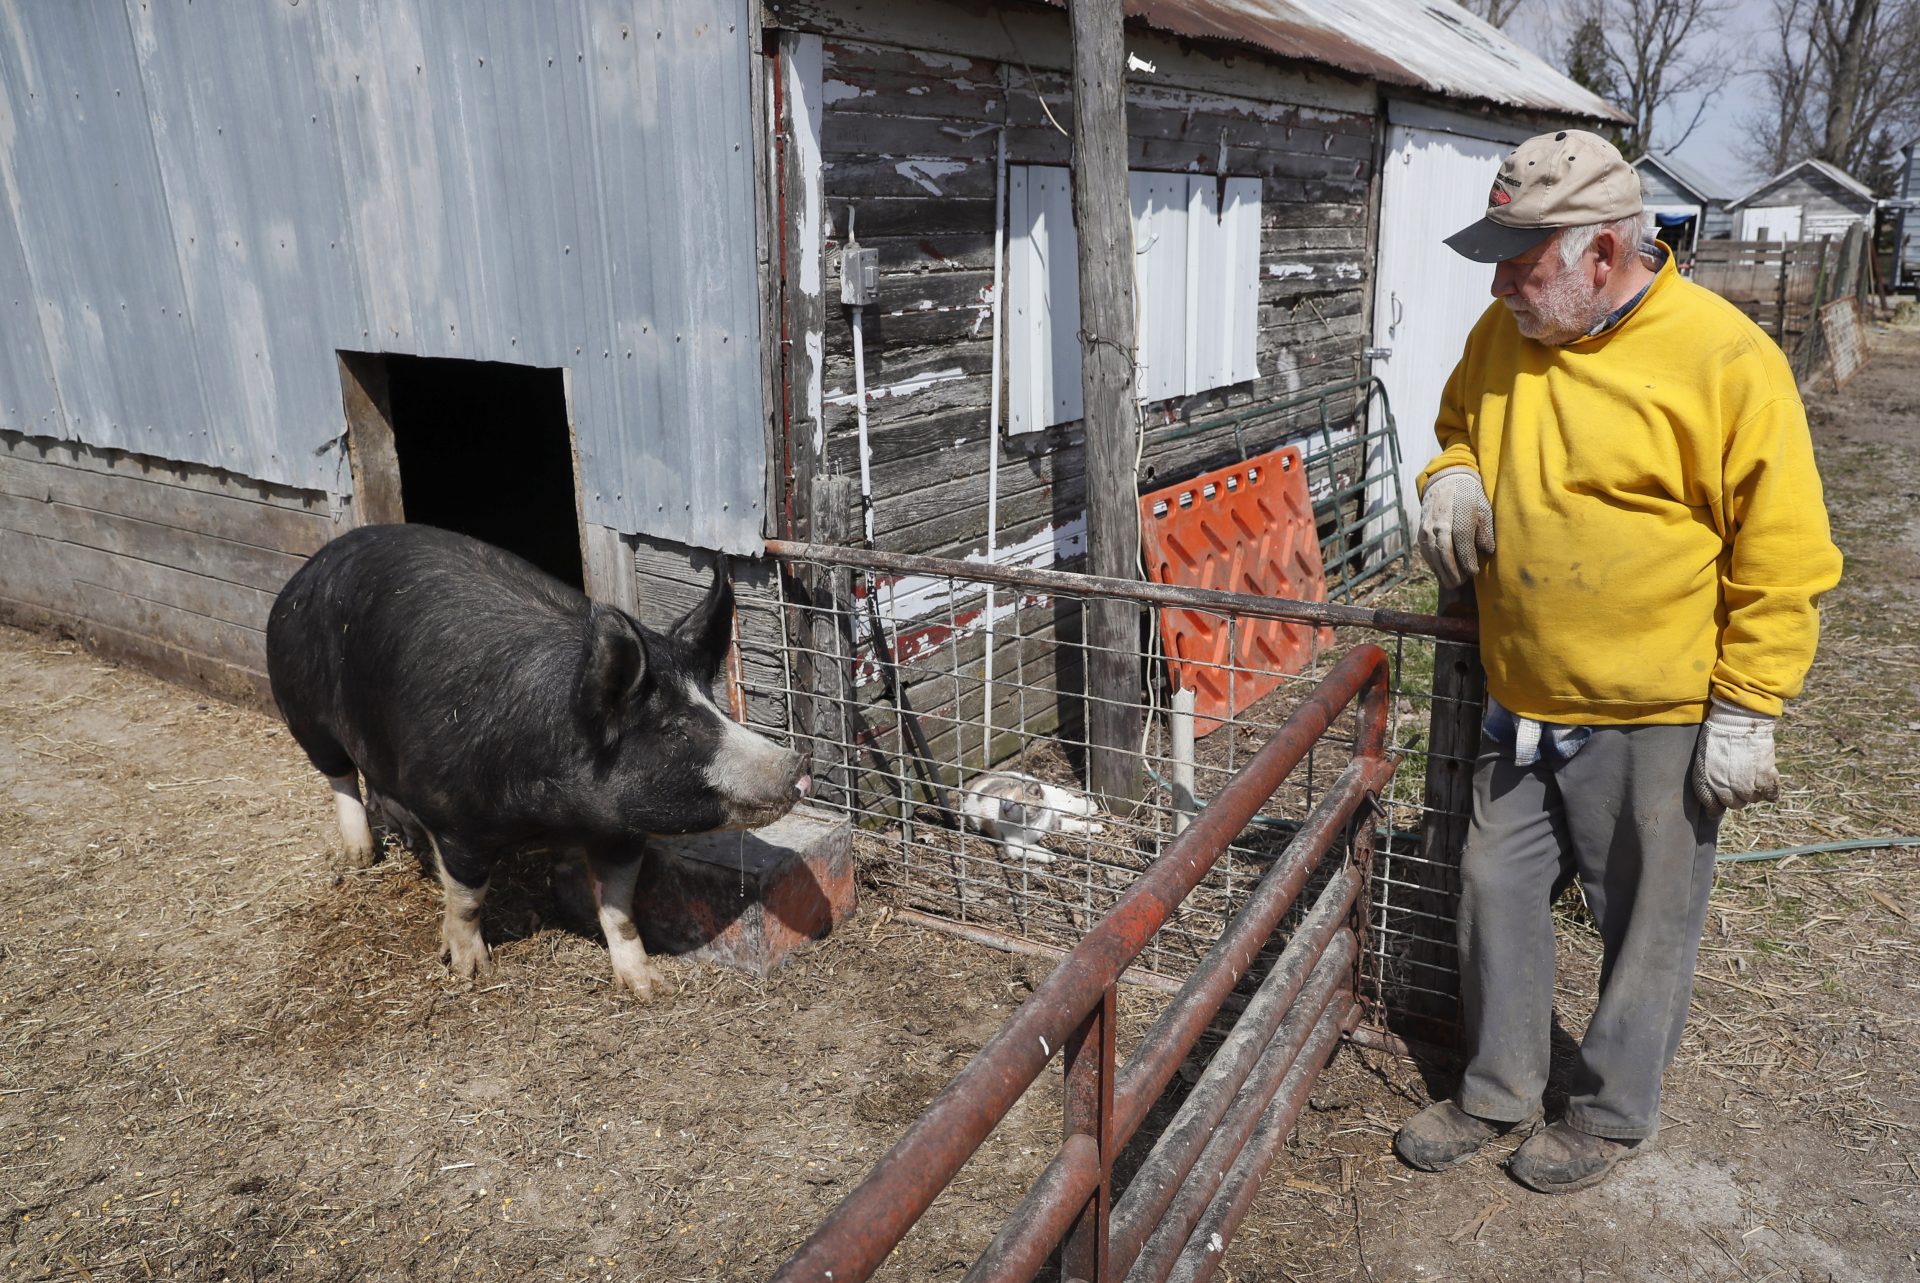 In this Friday, April 17, 2020, photo, Chris Petersen looks at a Berkshire hog in a pen on his farm near Clear Lake, Iowa. COVID-19, the disease caused by the coronavirus, has created problems for all meat producers, but pork farmers have been hit especially hard.